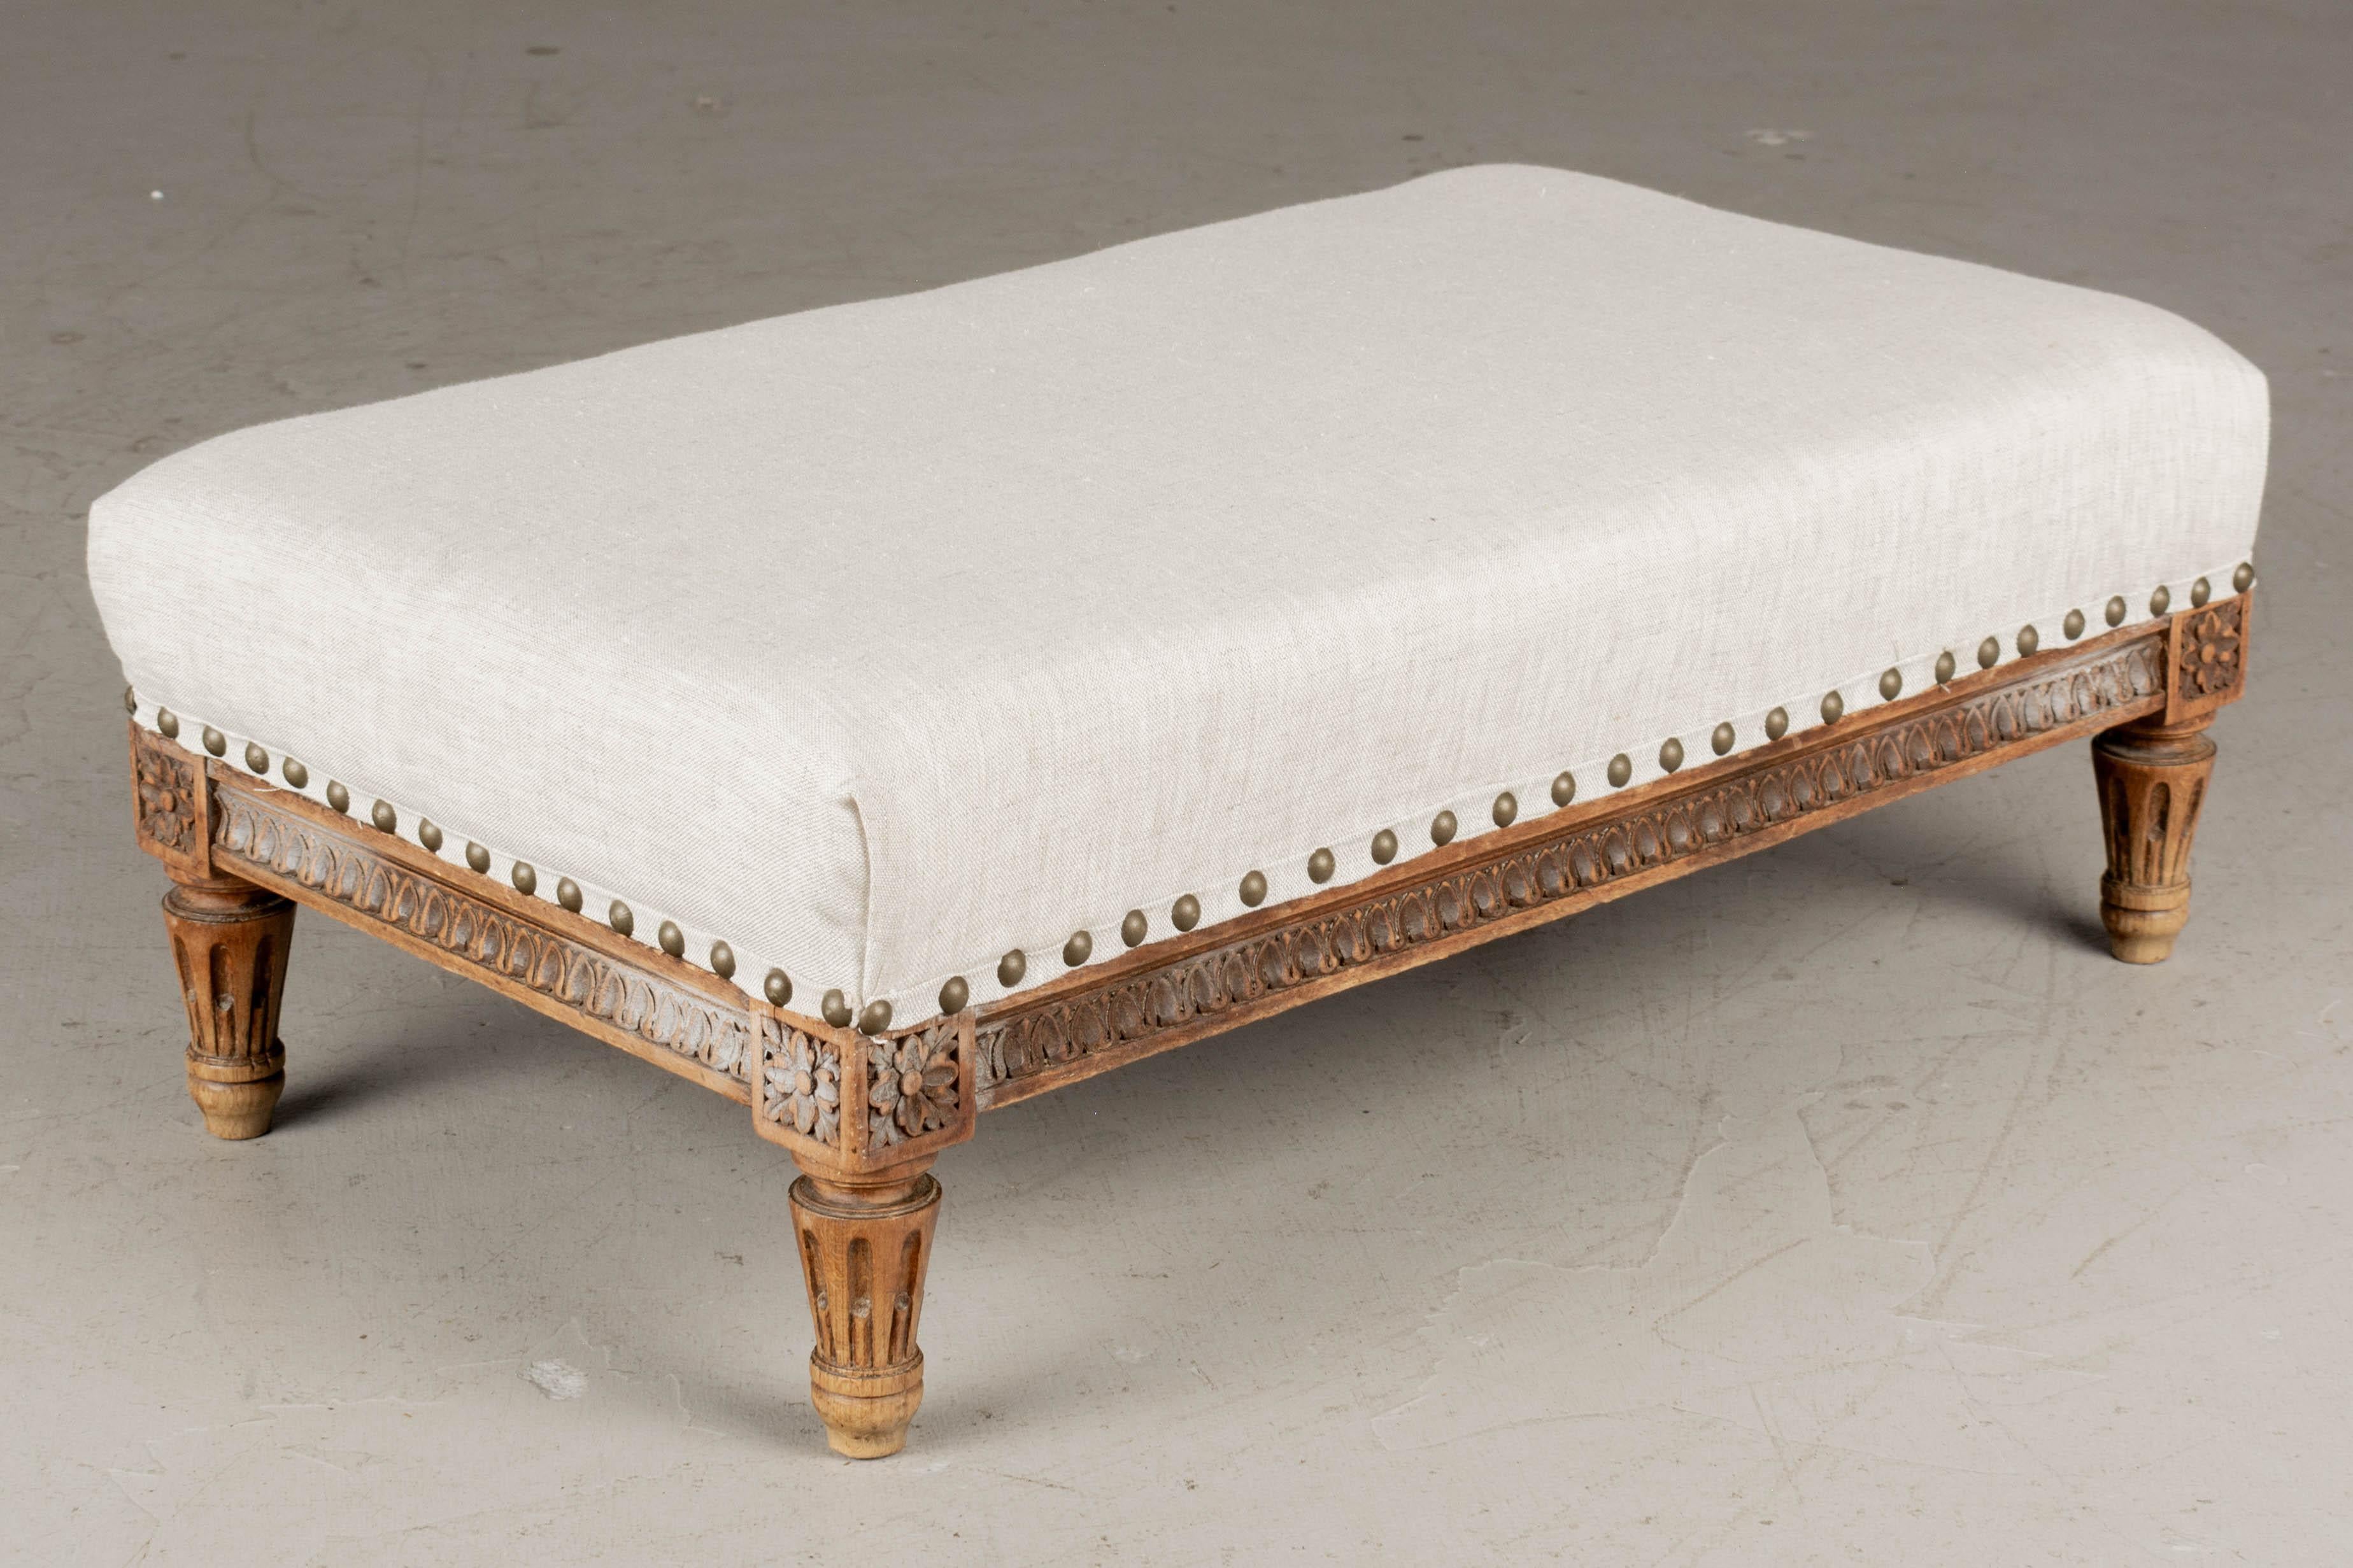 A 19th century Louis XVI style low footstool or ottoman, made of beech wood with hand-carved frame and short turned tapered peg legs. Newly upholstered with brass nail head trim.
Contact us for a competitive shipping quotation. Please refer to